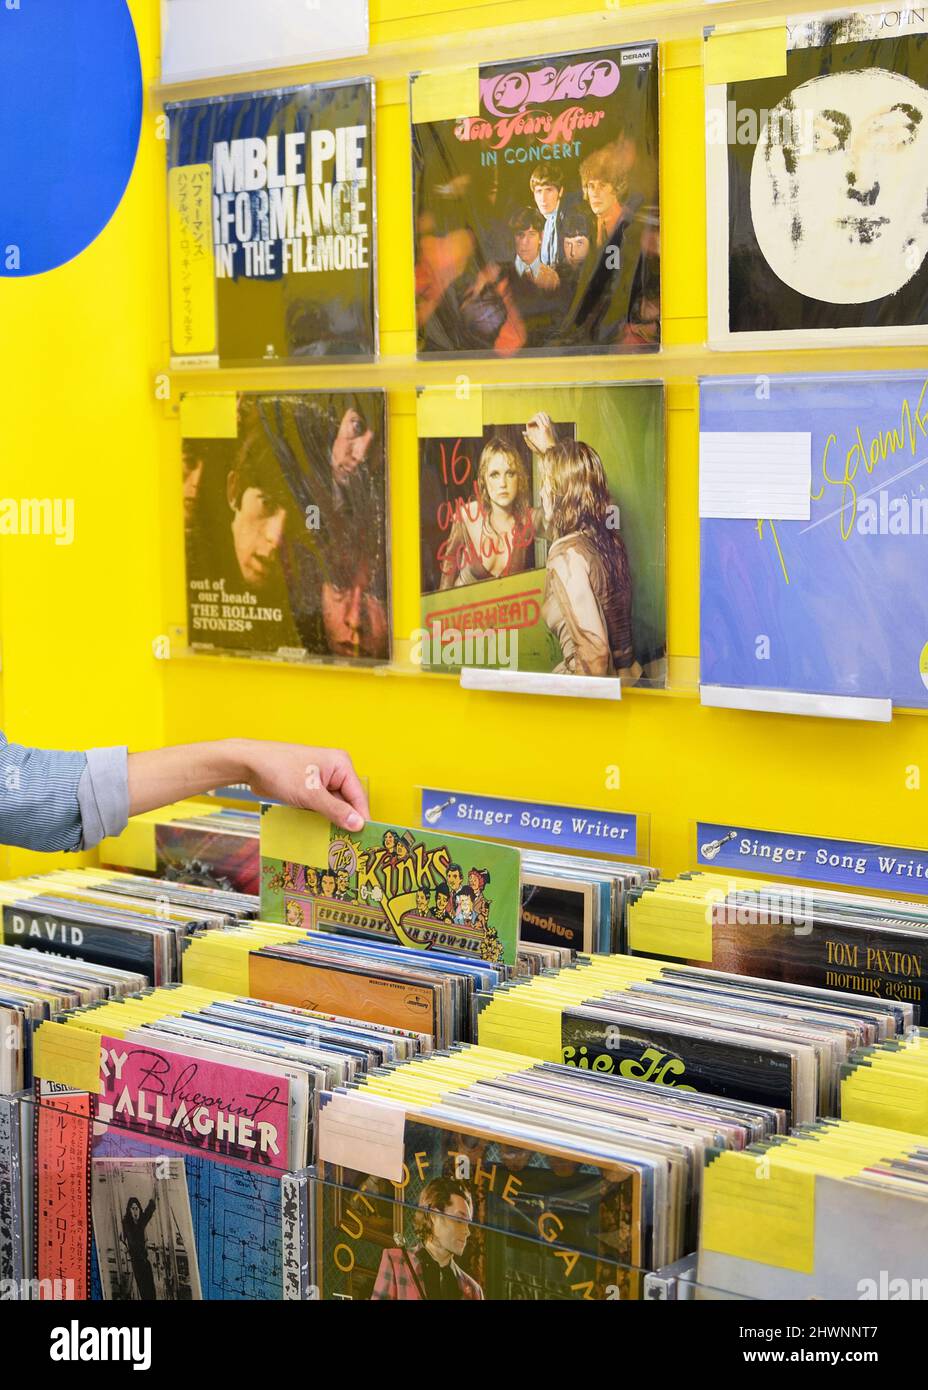 Inside of a record store, vinyl albums on display. Stock Photo